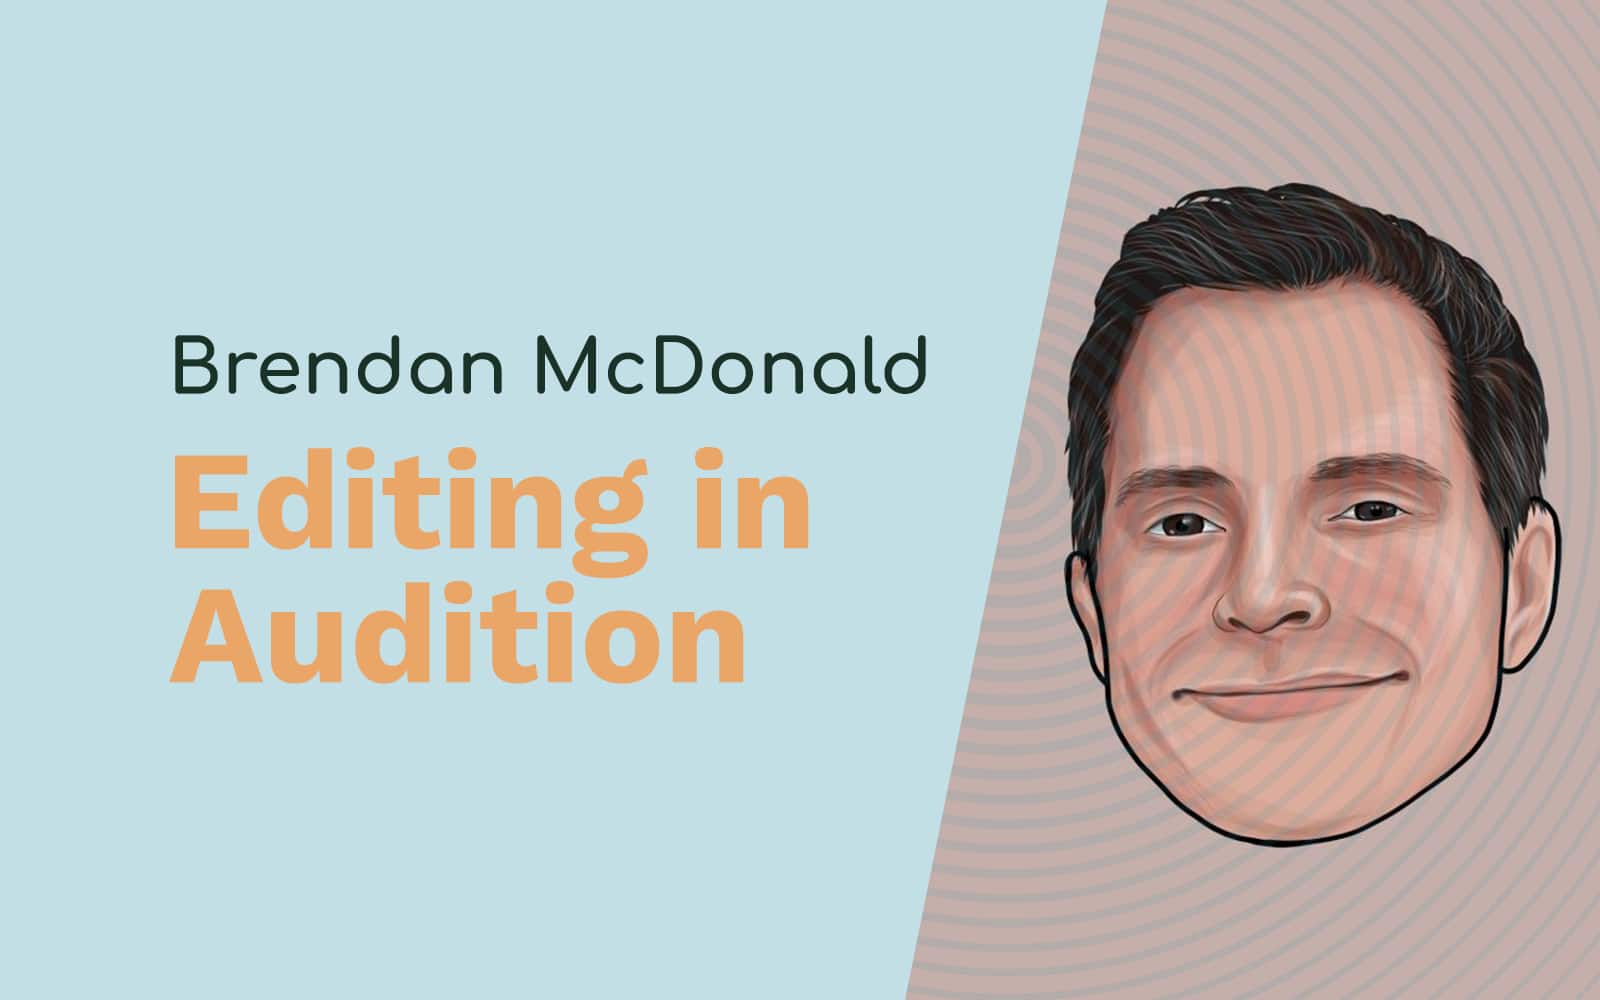 Brendan McDonald: WTF Podcast, Editing in Audition and Interviewing Obama Adobe Audition Podcast  Music Radio Creative